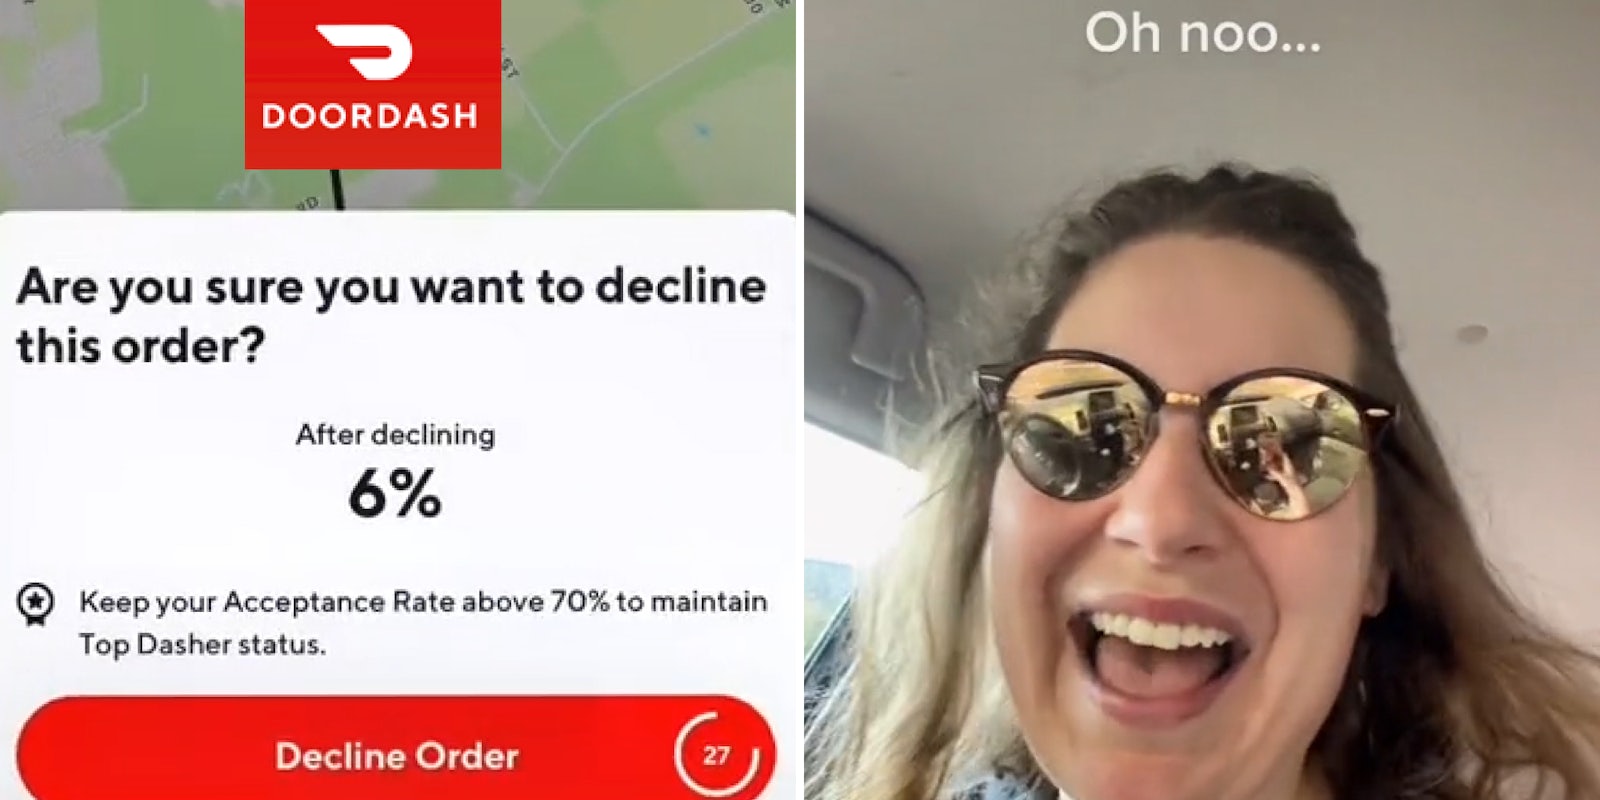 Doordash notification with doordash logo above caption 'Are you sure you want to decline this order? After declining 6% Keep your acceptance rate above 70% to maintain Top Dasher status' (l) Woman in car mouth open caption 'oh no...' (r)